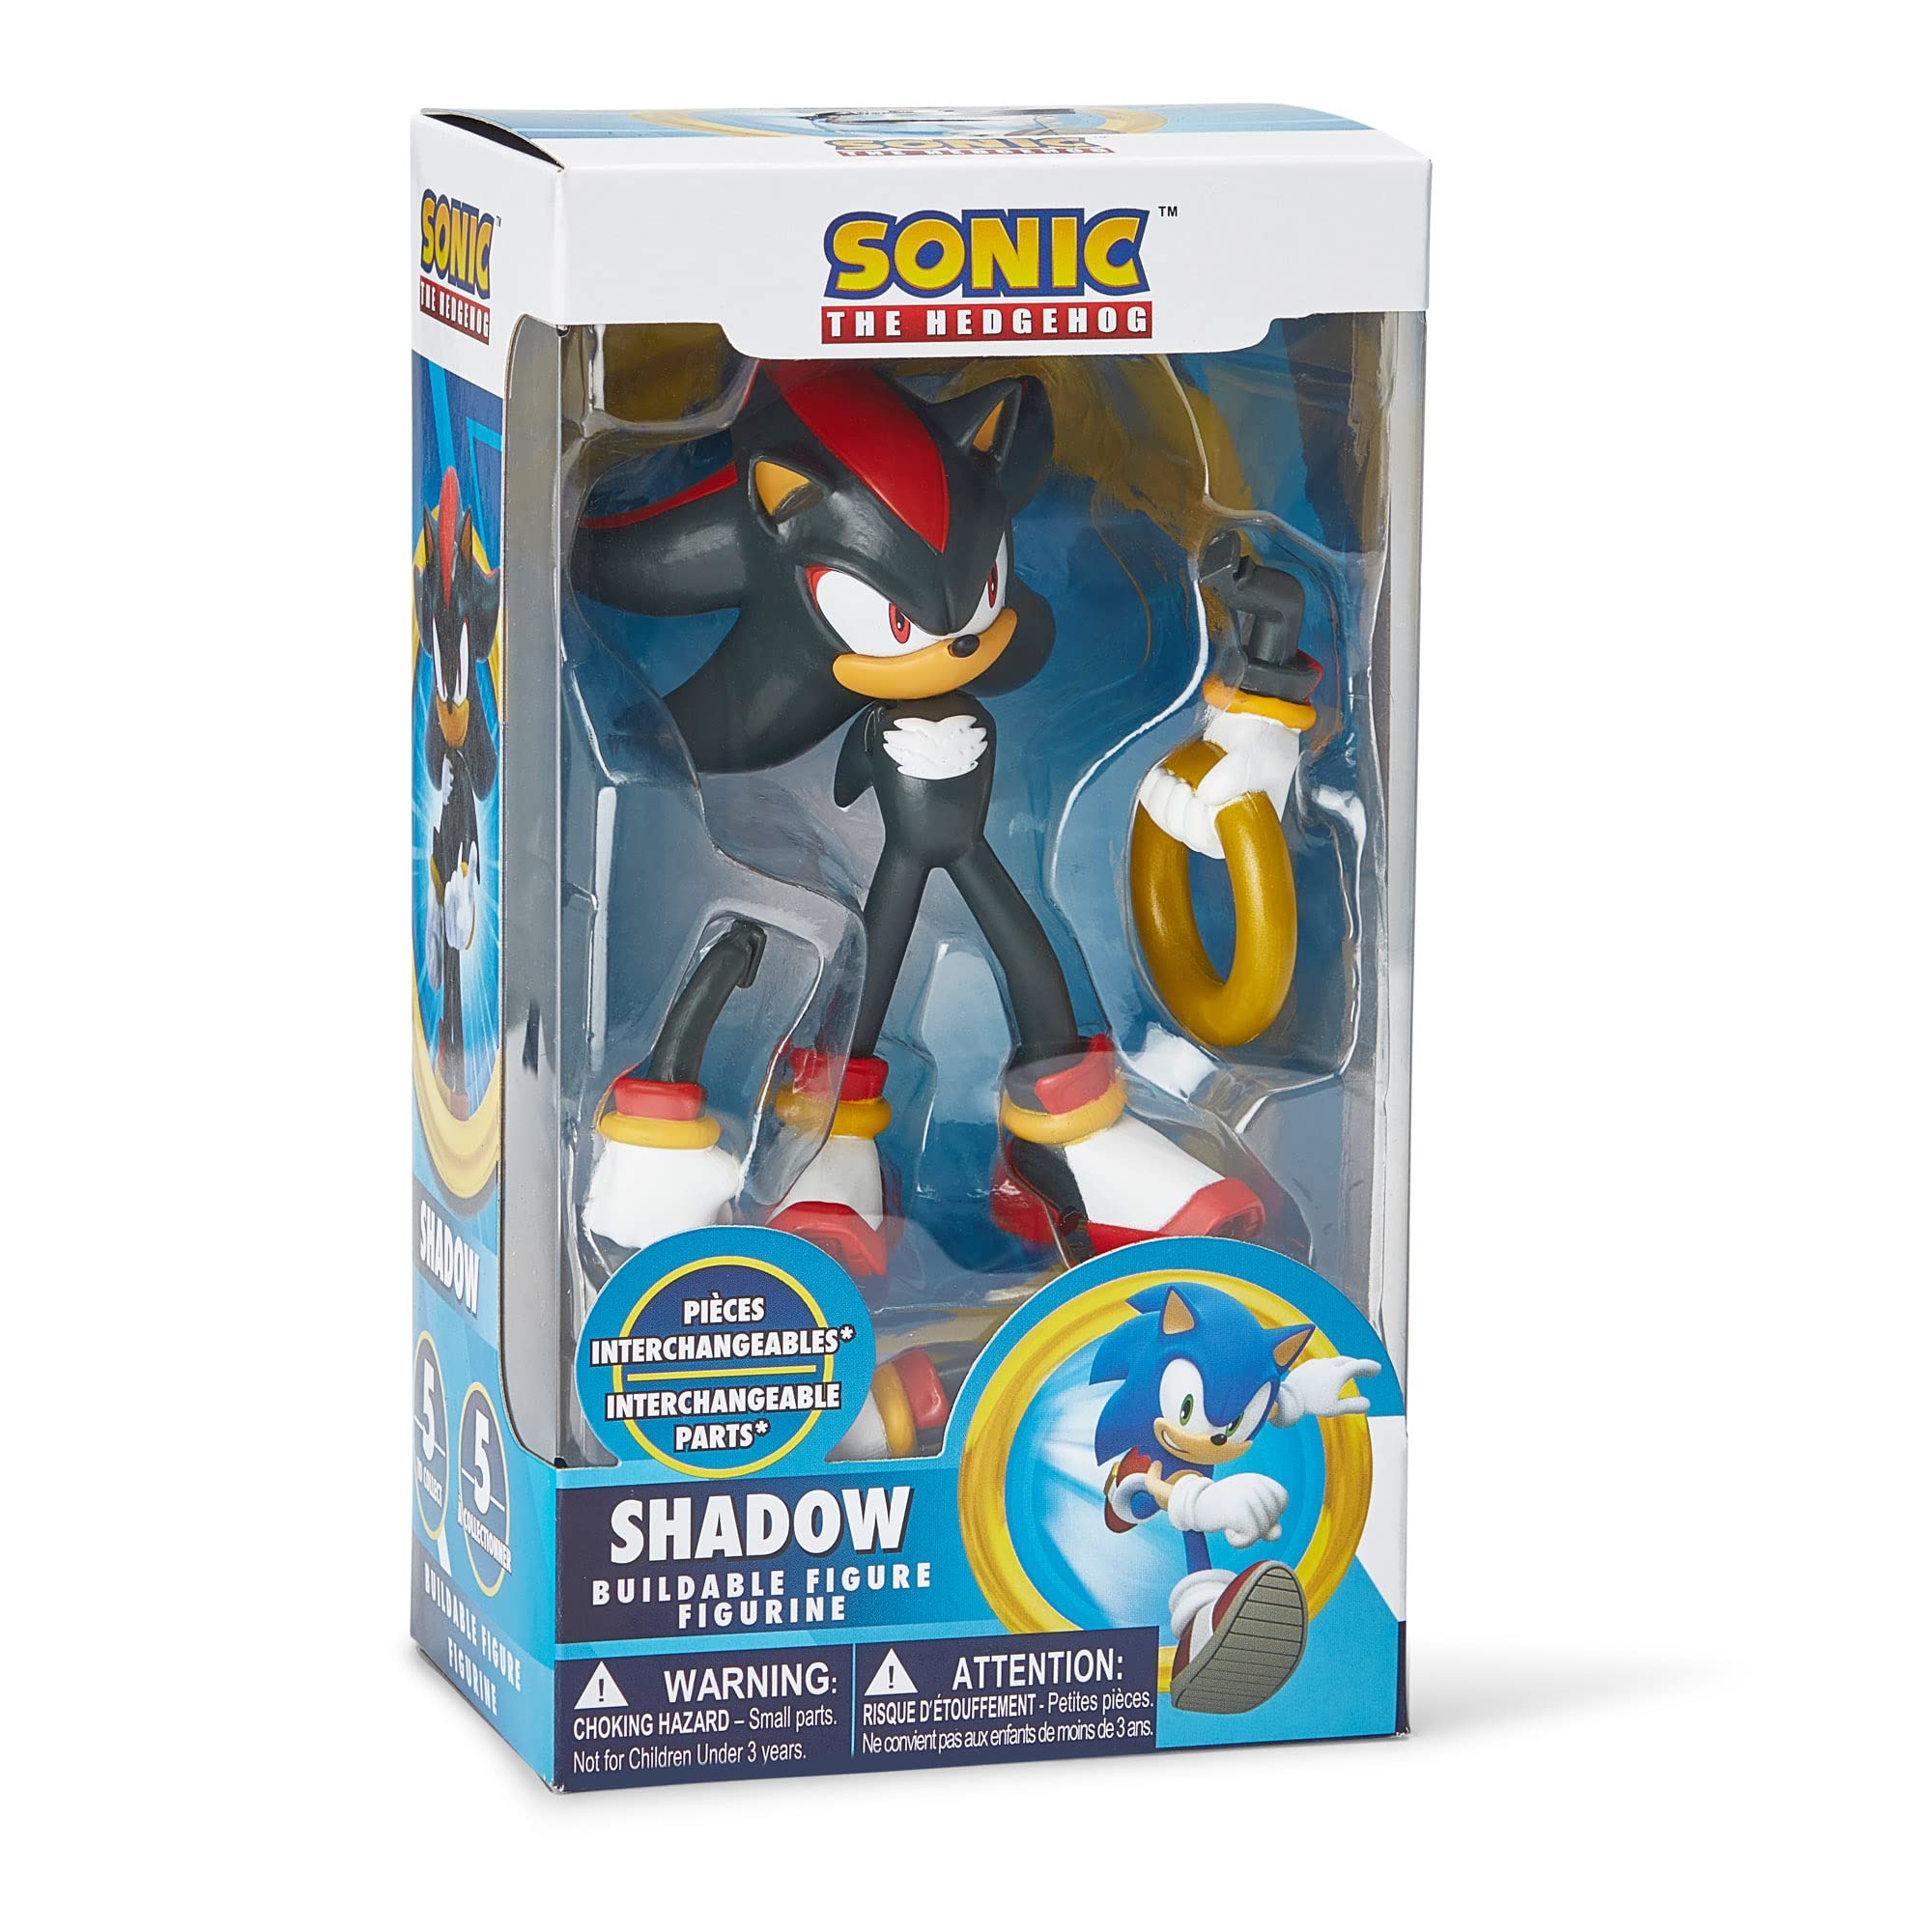 Just Toys LLC Sonic The Hedgehog Action Figure Toy - Shadow Figure with Sonic, Knuckles, Amy Rose, and Shadow Figure. 4 inch Action Figures - 